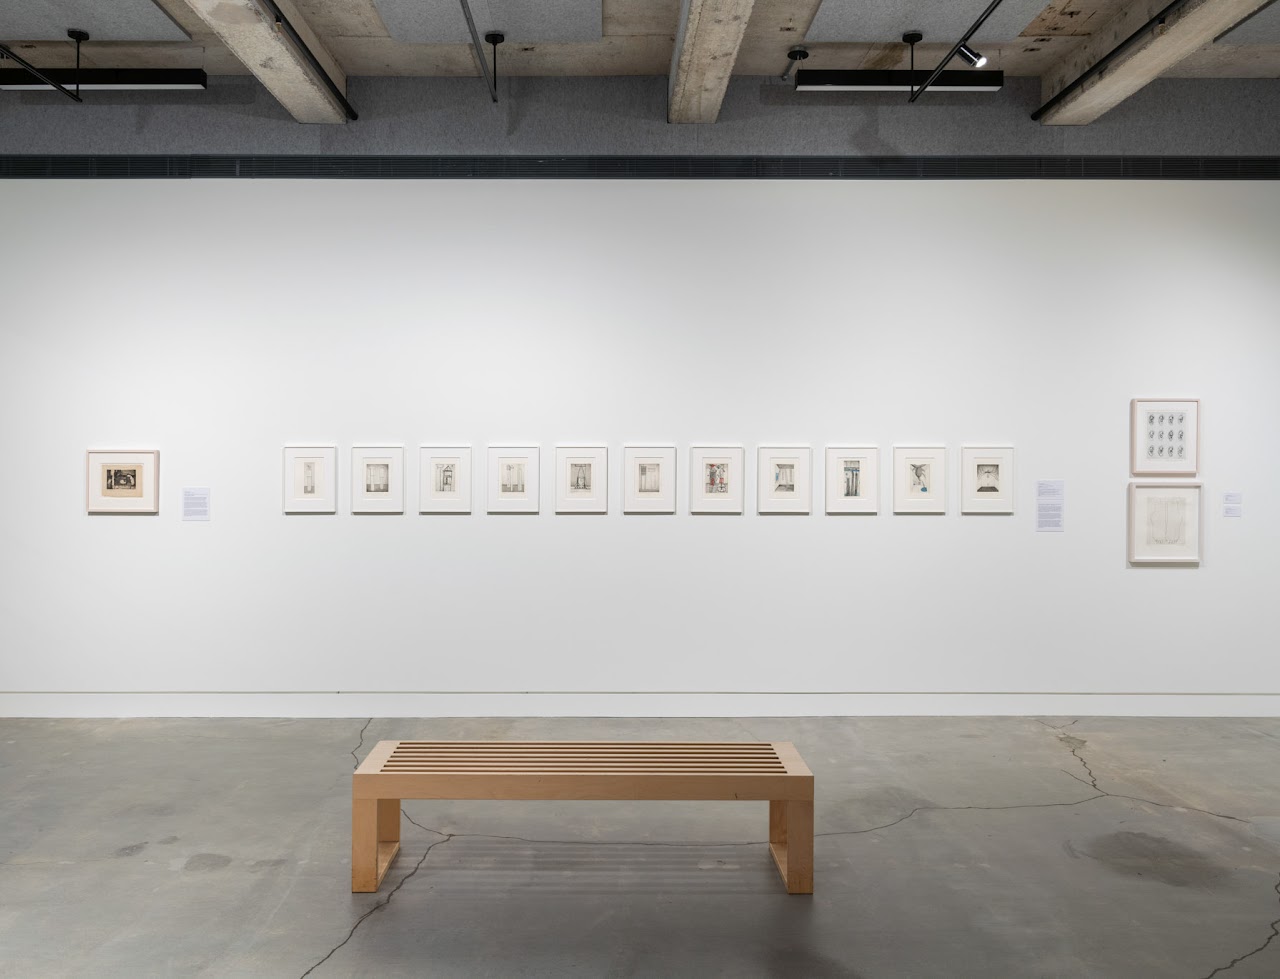 Installation view of Louise Bourgeois: What is the Shape of This Problem, From the Collections of Jordan D. Schnitzer and His Family Foundation. On view through December 4, 2021.